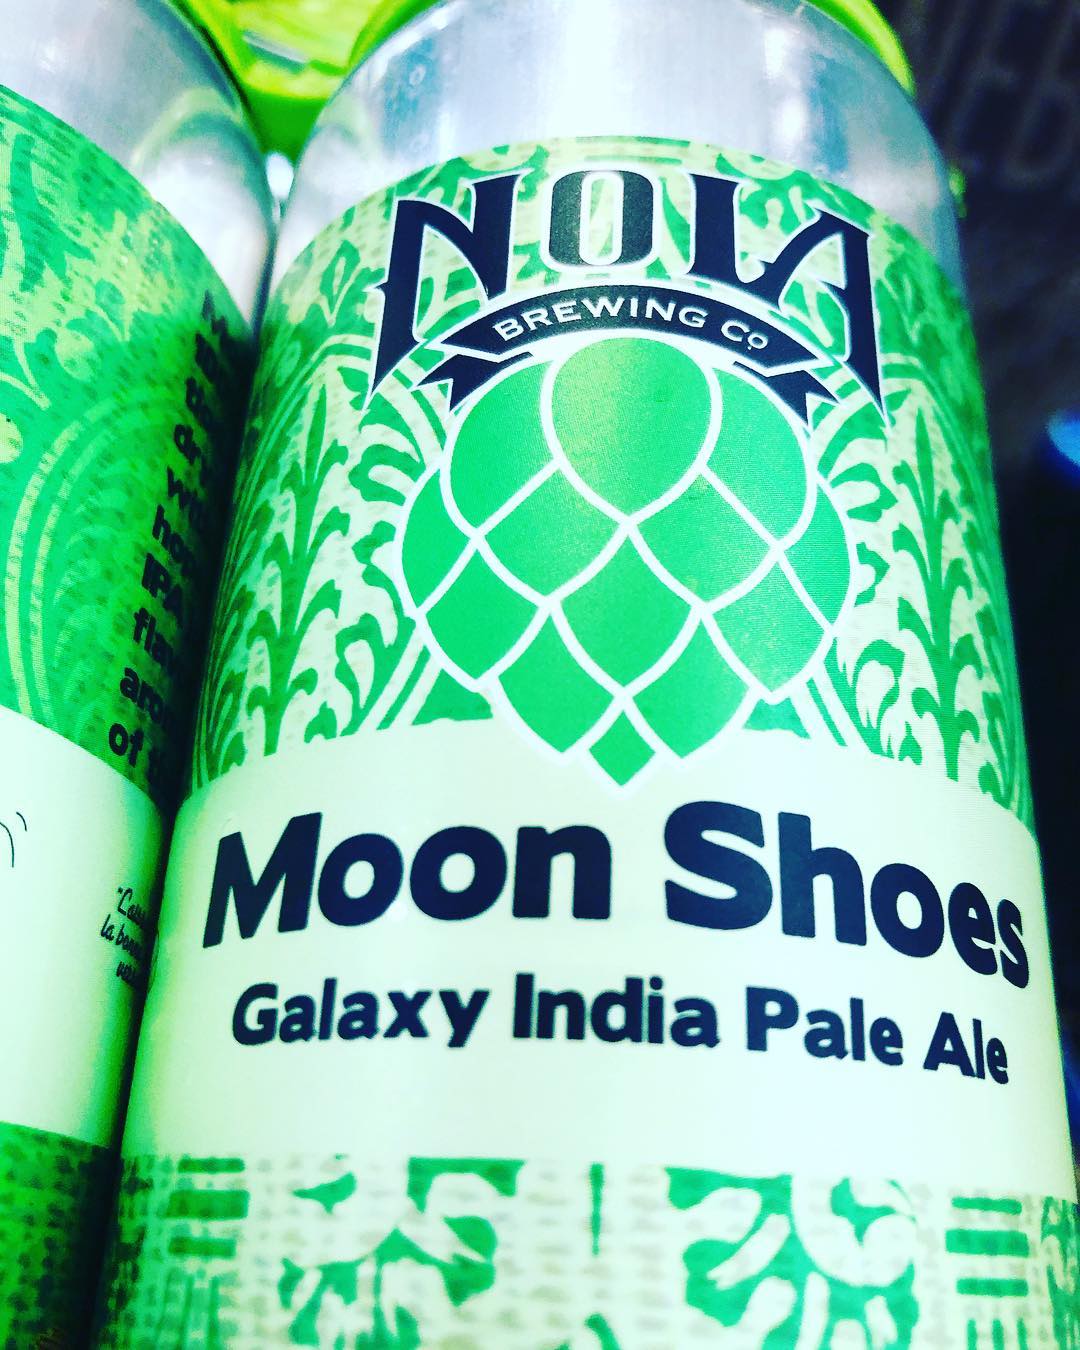 @nolabrewing Moon Shoes is now available at BOTH locations! #beer #drinklocal #midcitybr #freshhops